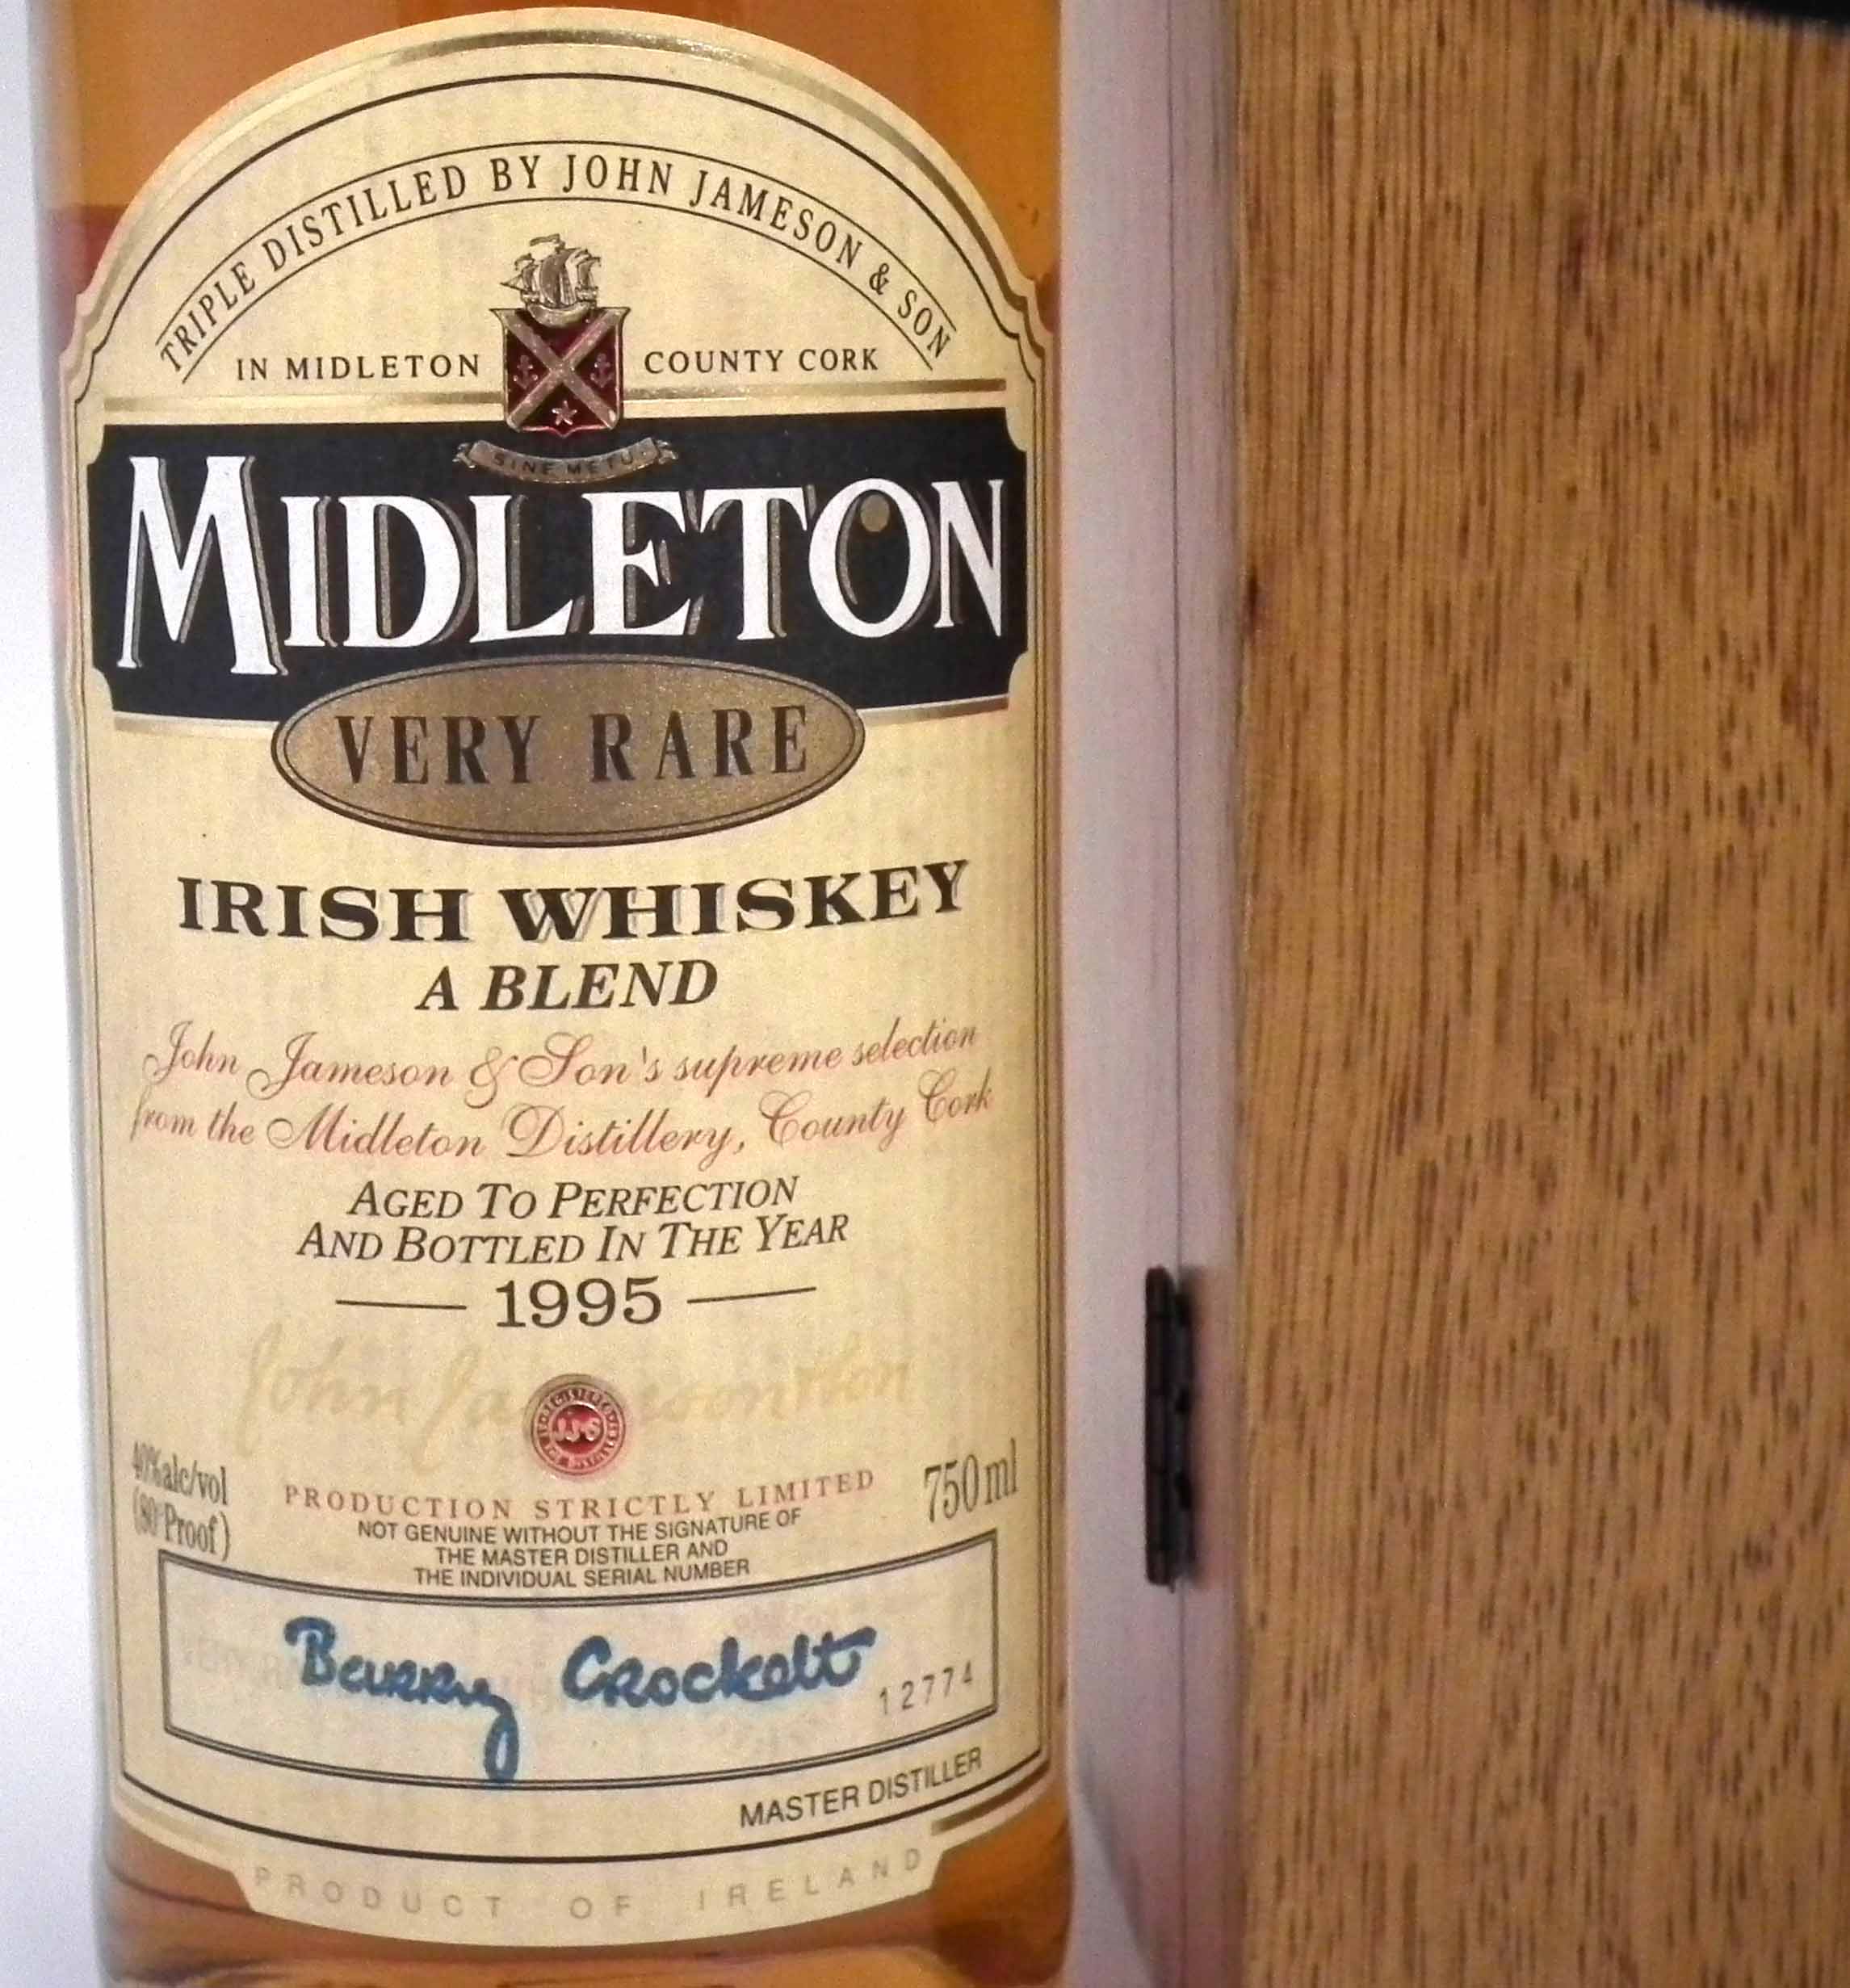 Midleton Very Rare Irish Whiskey - 1995 - 750ml number 12774 with wood box, certificate and - Image 2 of 6